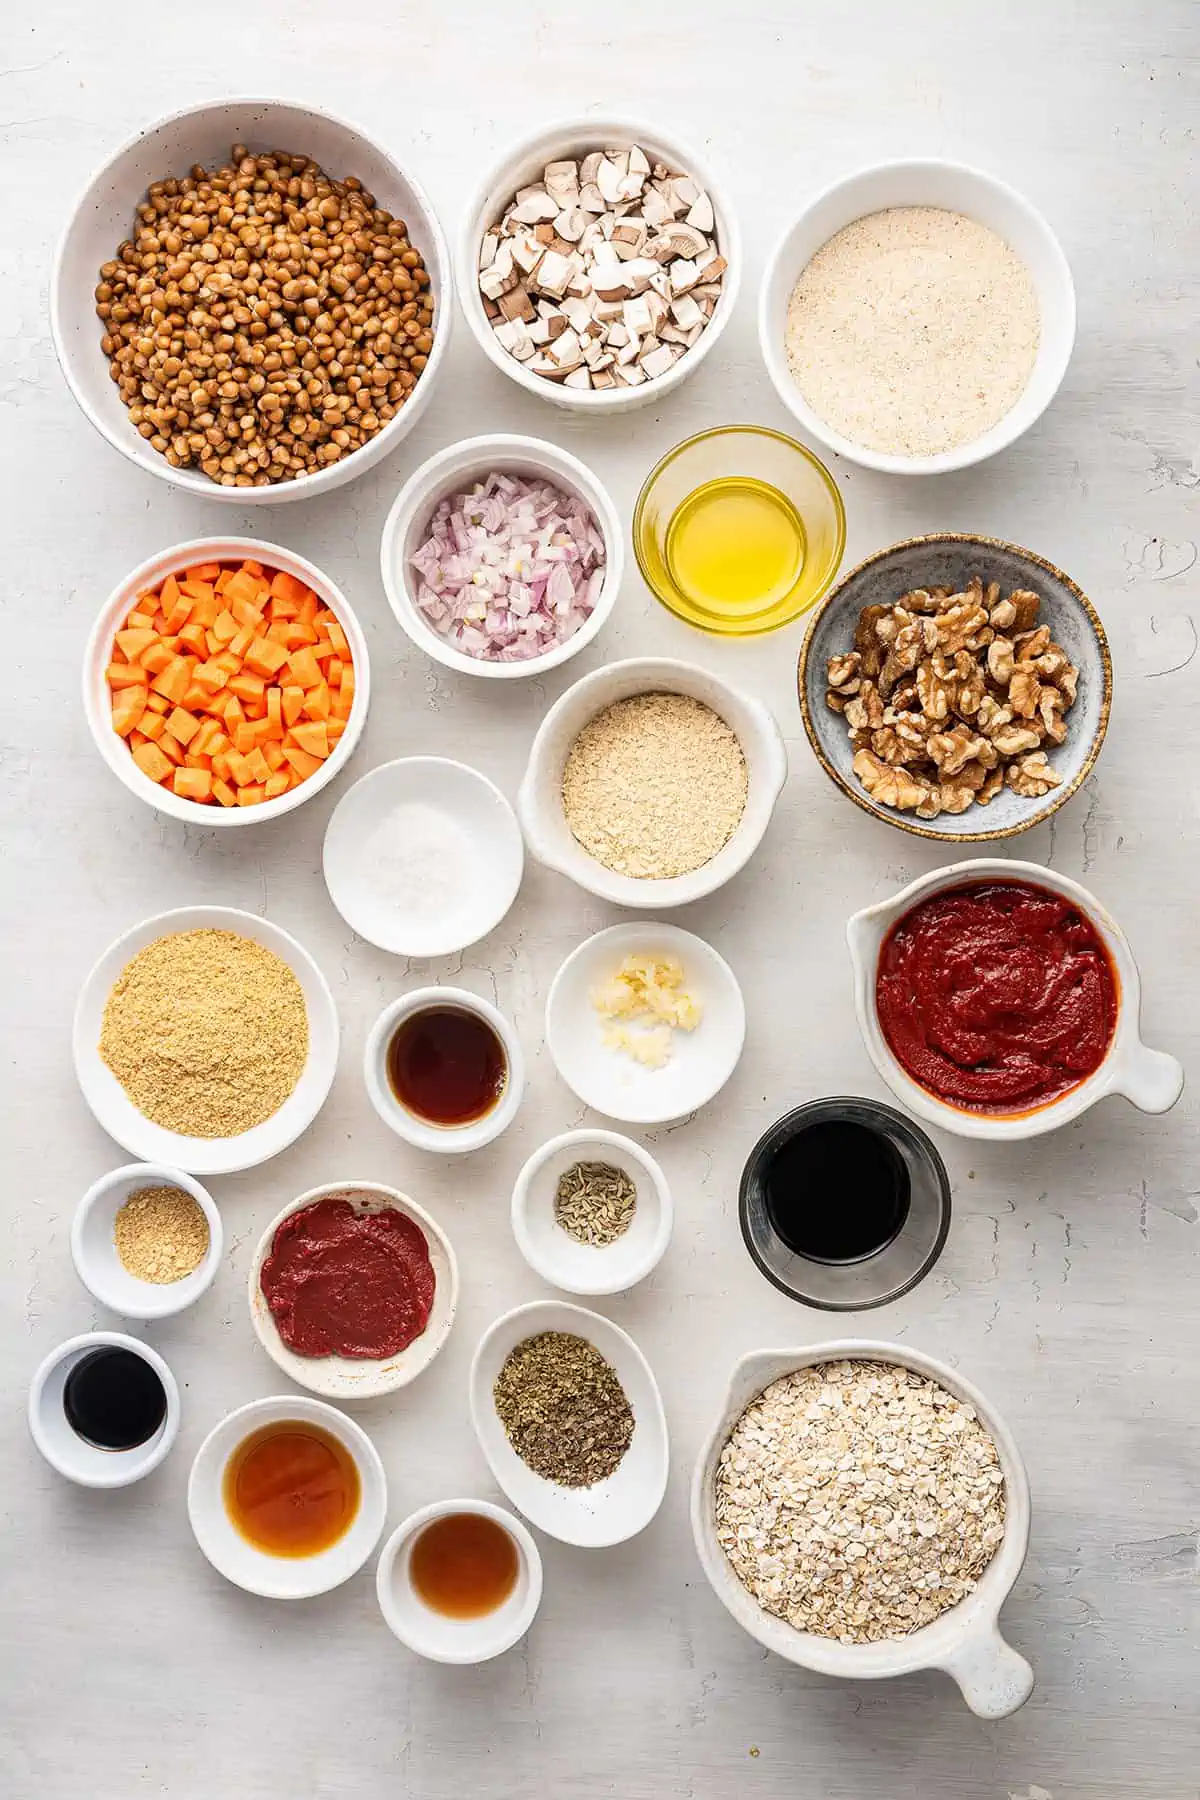 Overhead view of the ingredients for vegan meatloaf, each in a separate bowl: lentils, mushrooms, bread crumbs, carrots, shallots, oil, walnuts, nutritional yeast, tomato paste, vinegar, maple syrup, tamari, ground mustard, oats, garlic, salt, pepper, flaxseed meal, hot sauce, oregano, basil, and fennel seeds